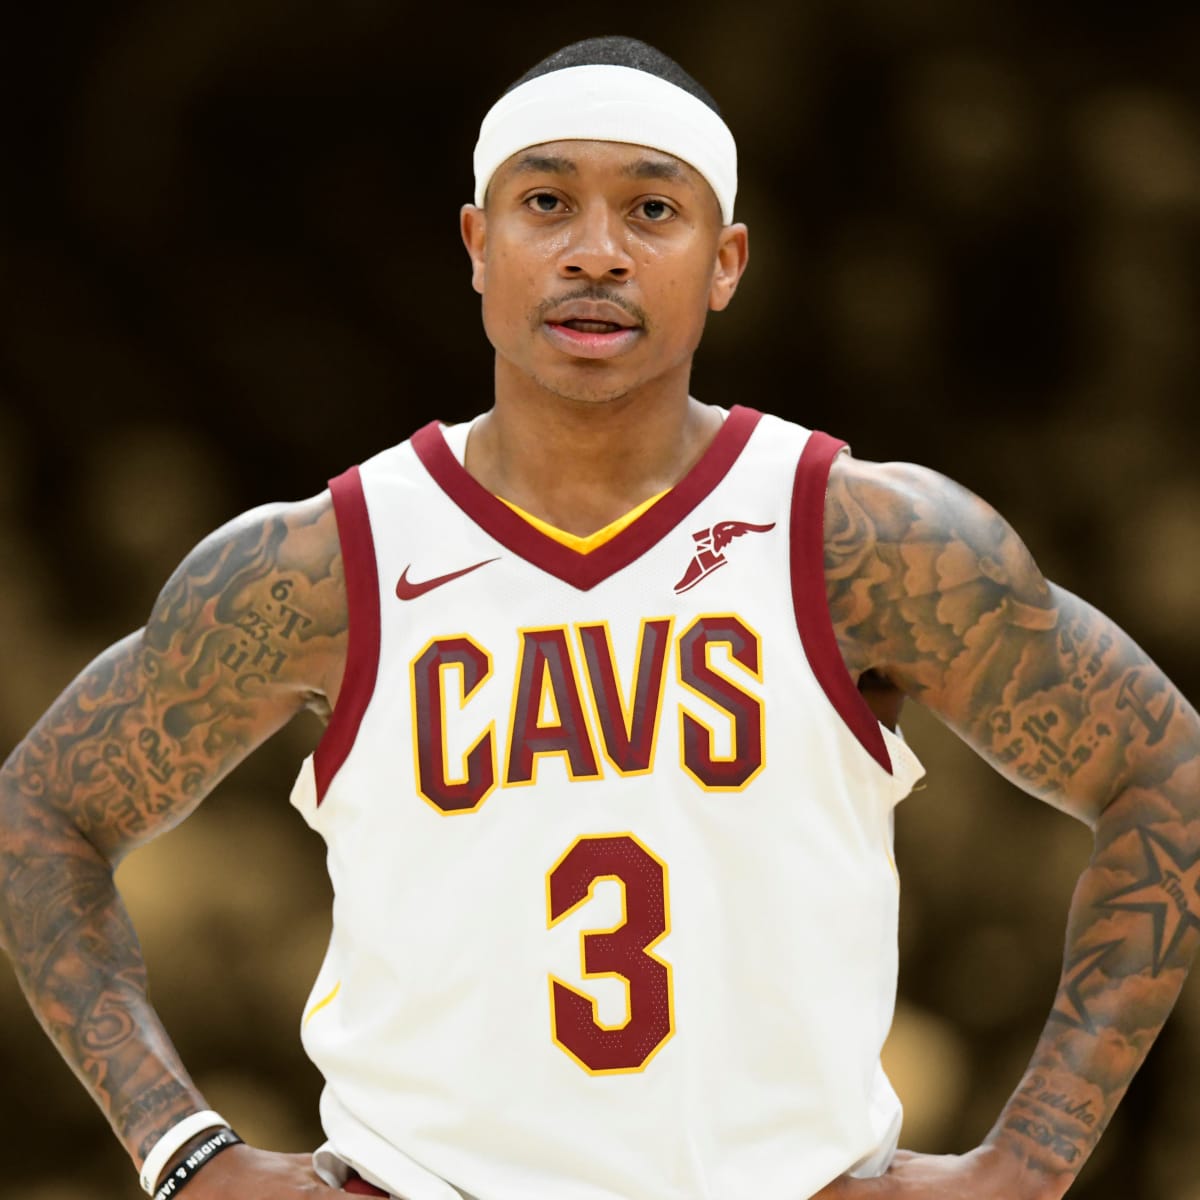 Isaiah Thomas was worried about handshakes after joining LeBron